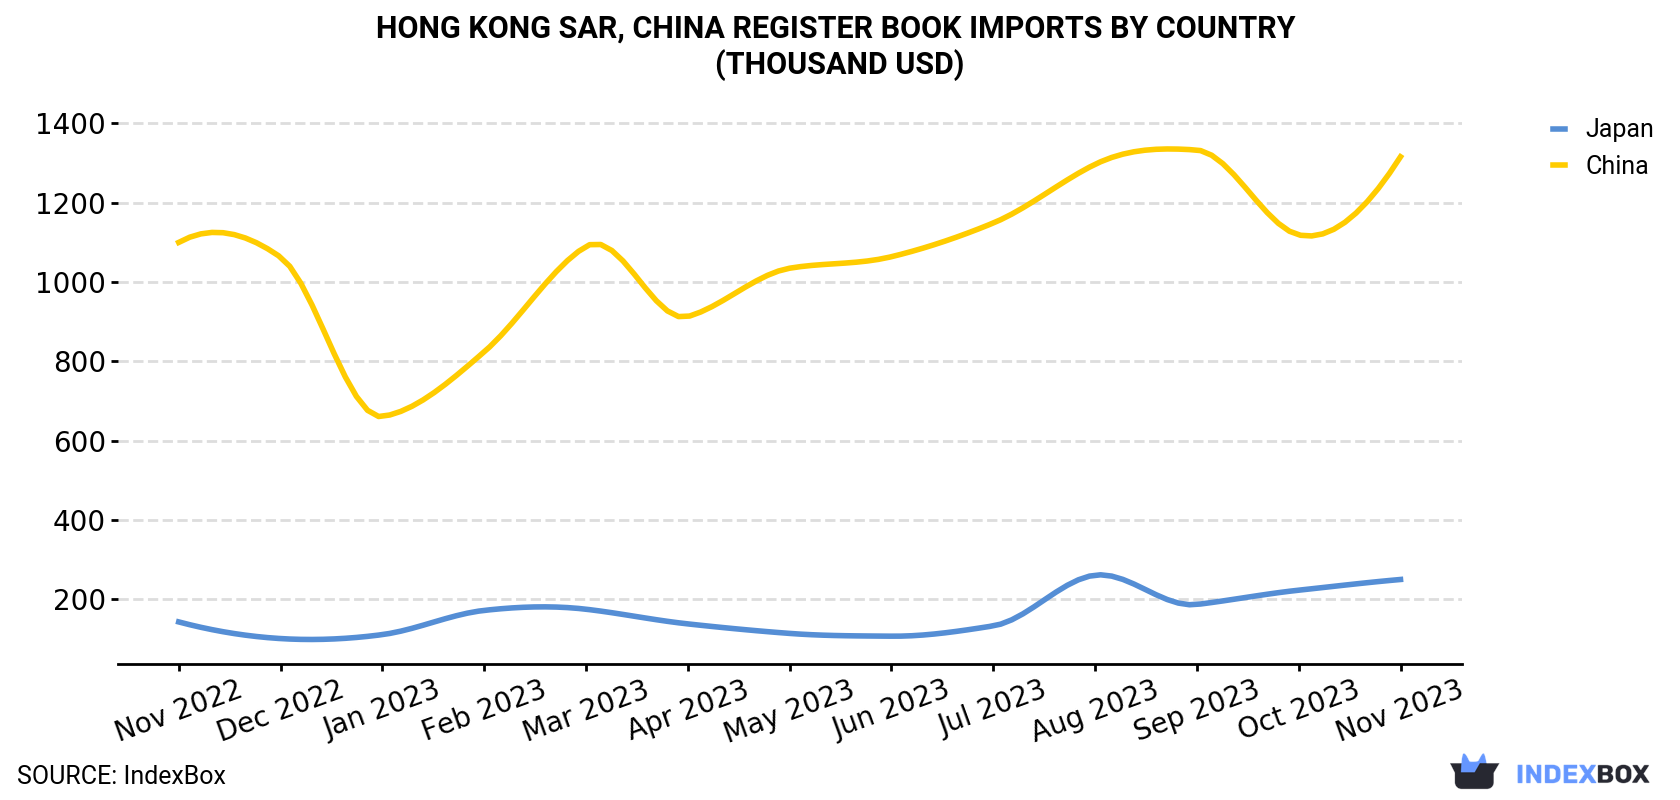 Hong Kong Register Book Imports By Country (Thousand USD)